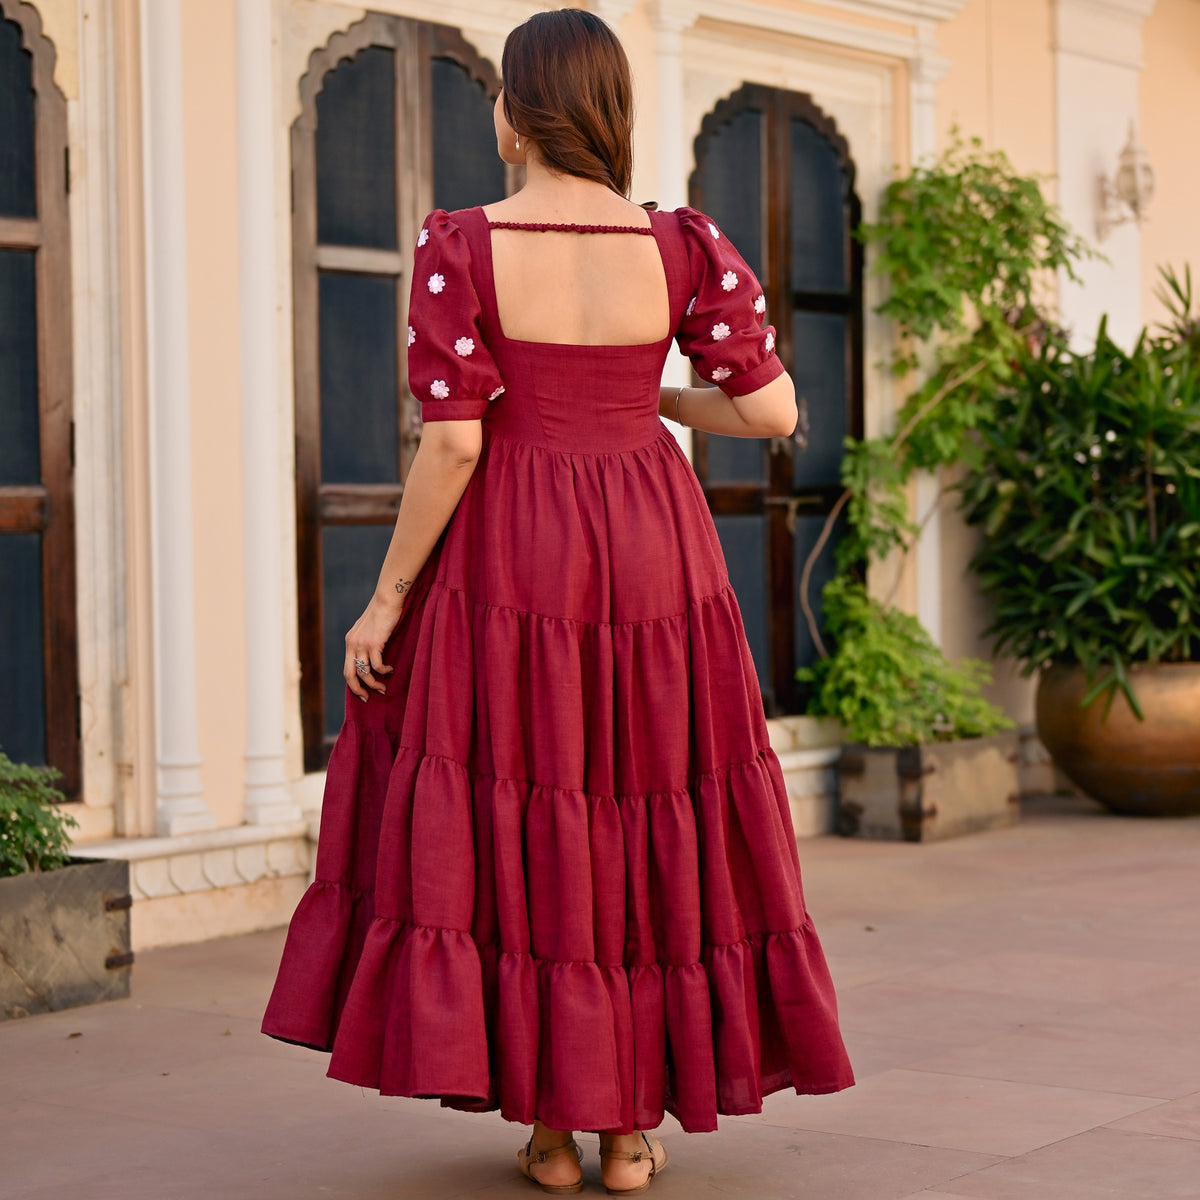 Maroon Floral Embroidery Dress